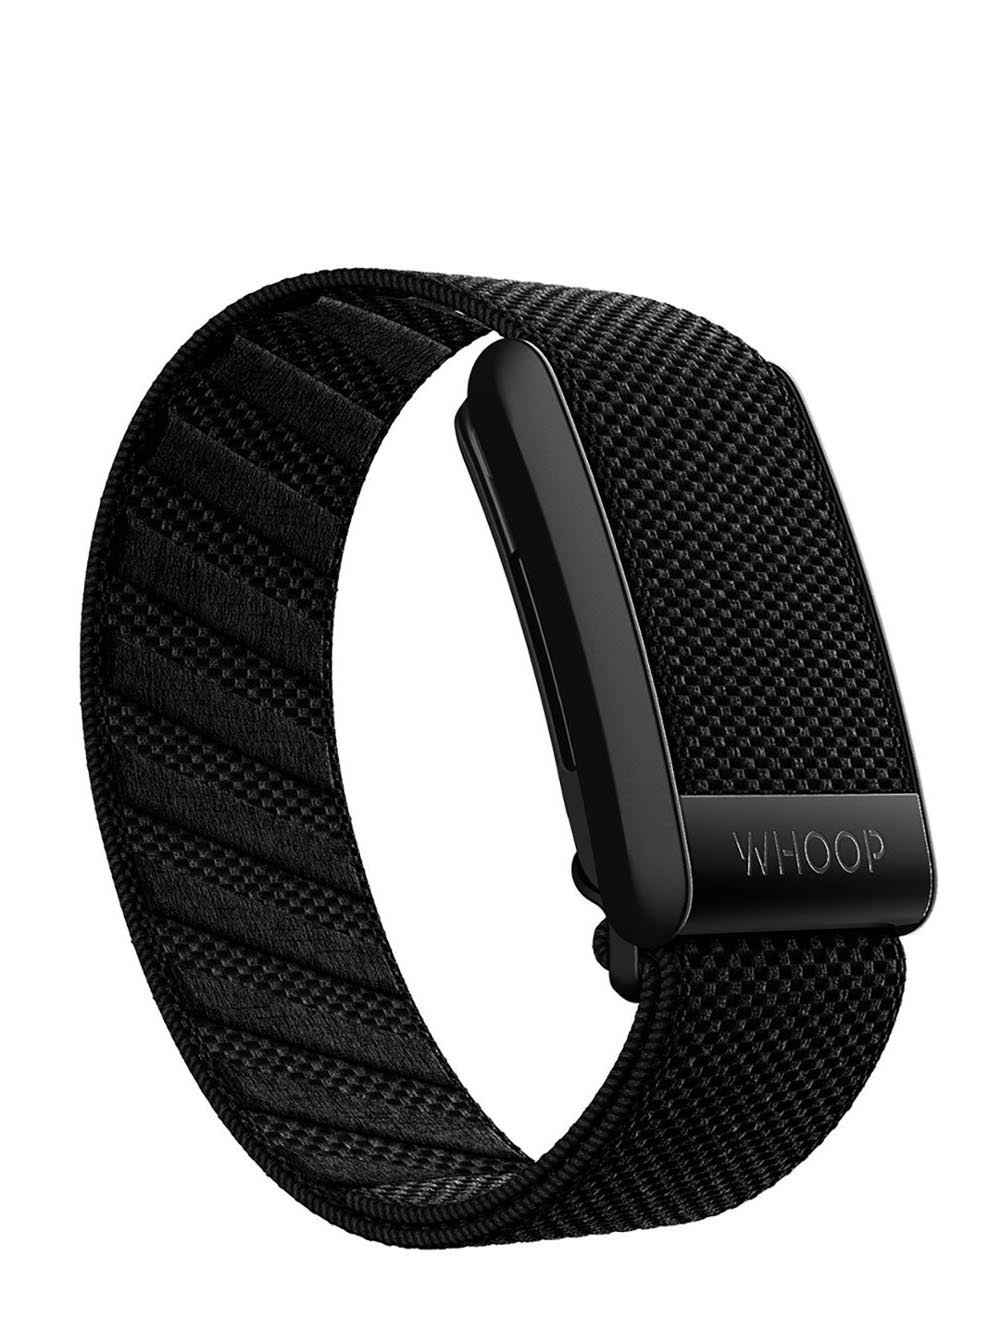 a photo of the Whoop 4.0 band